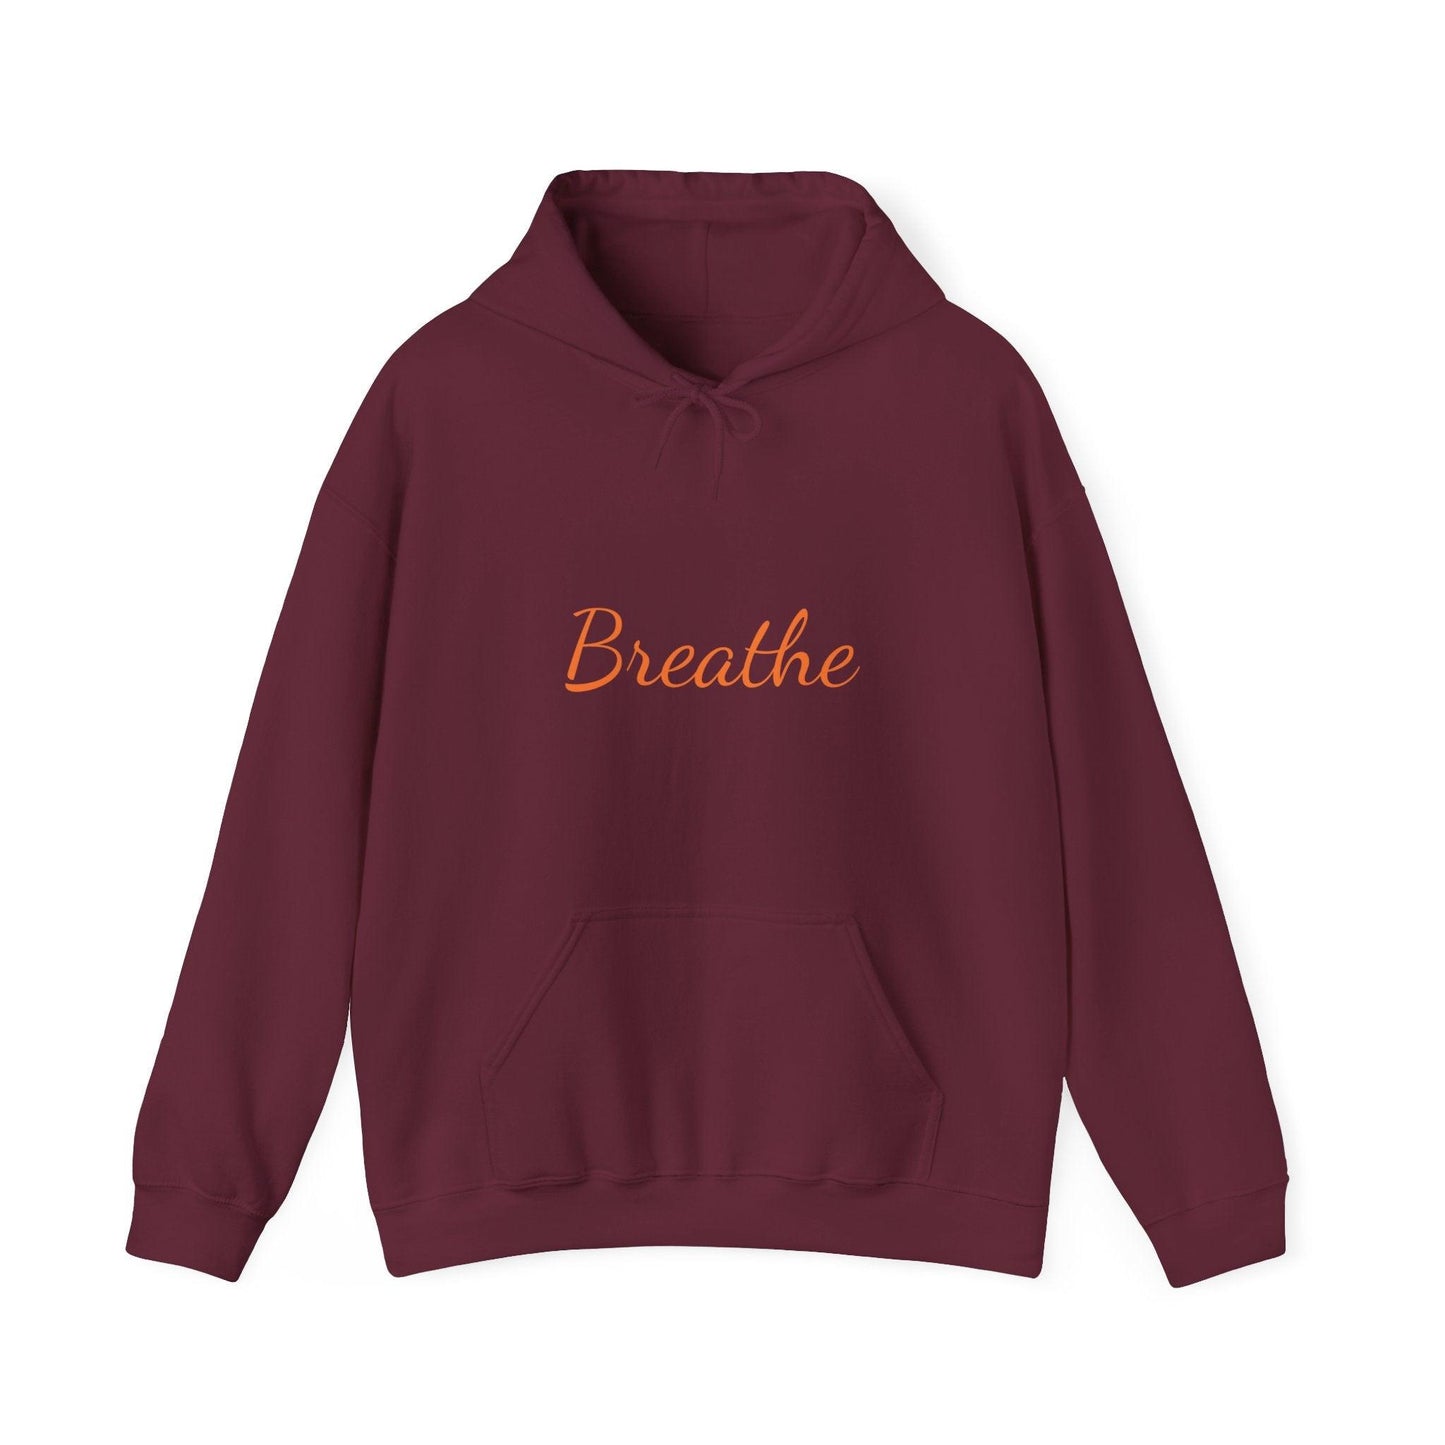 Maroon Unisex with Orange Breathe Logo Hoodie - Perfect for Travel, Meditation, Mindfulness and daily wear.